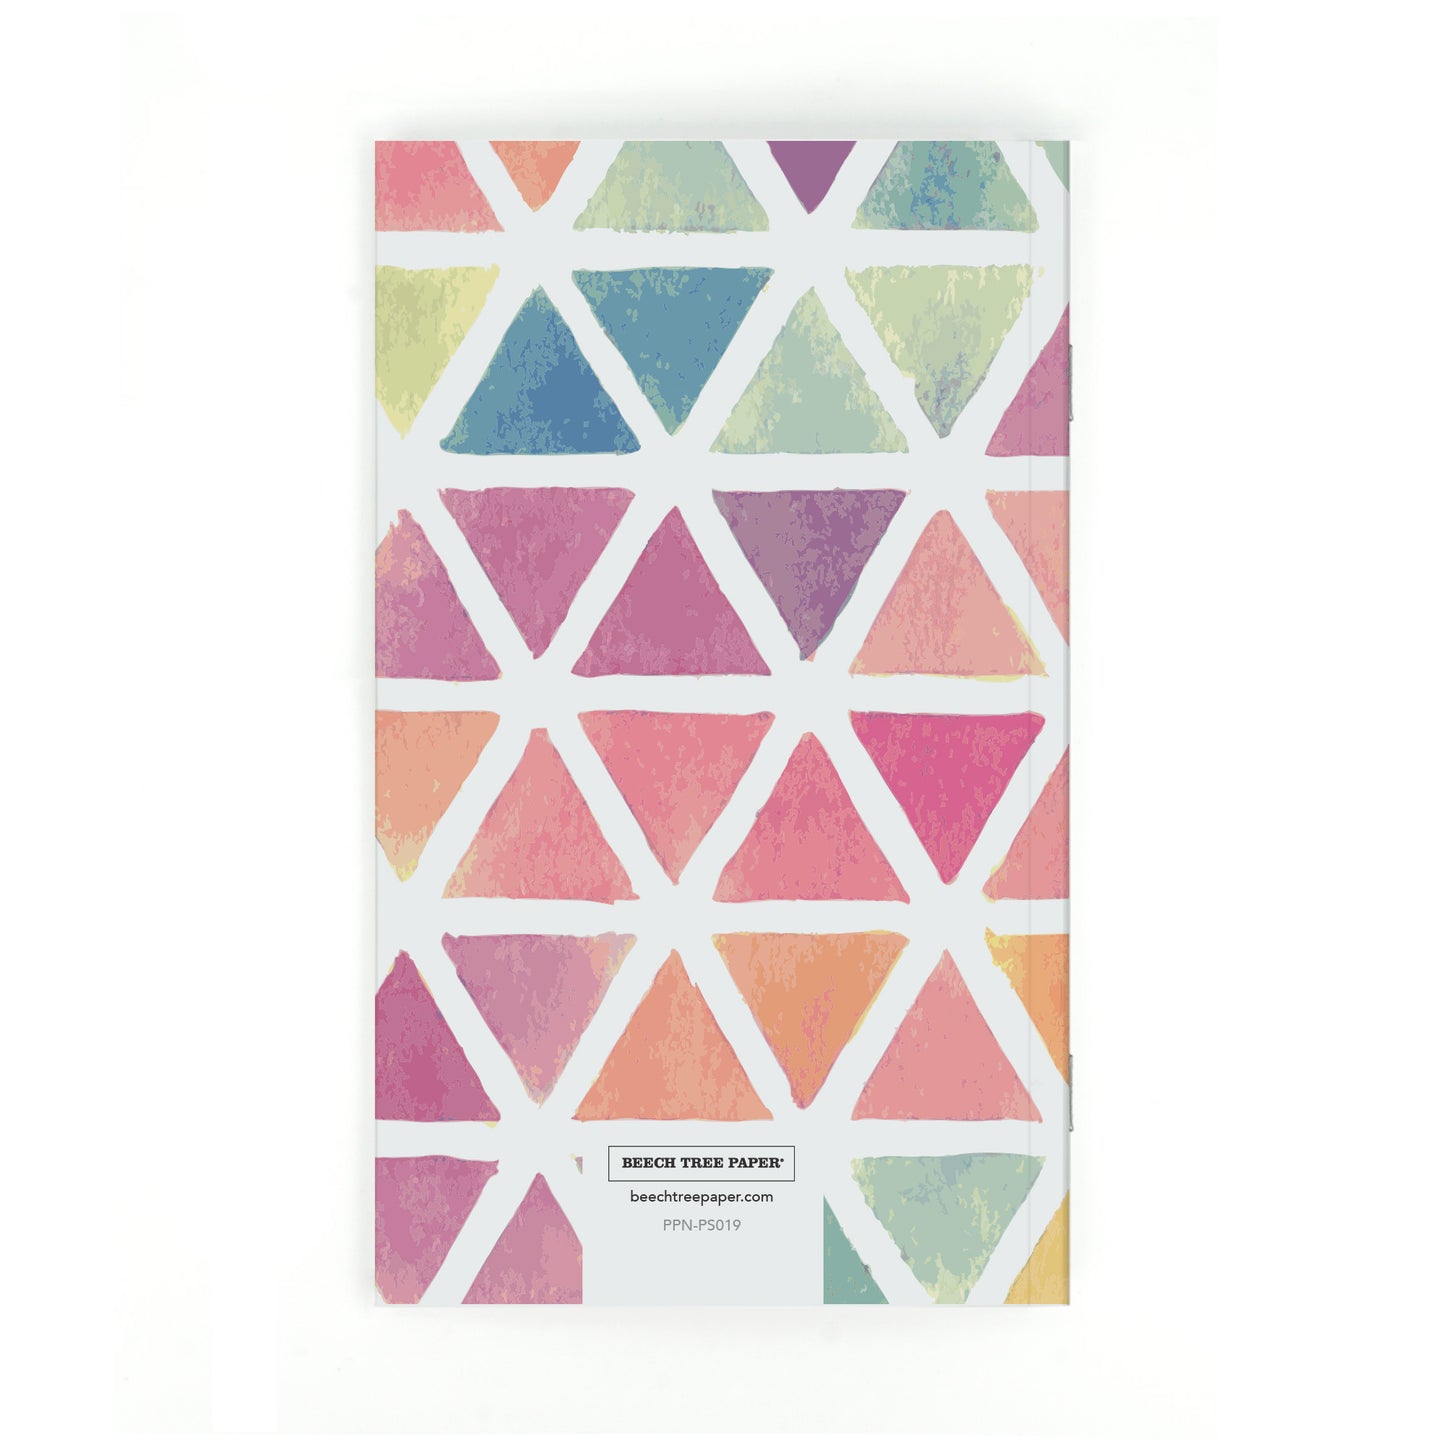 Personalized Notebook, Triangles, Add Your Name